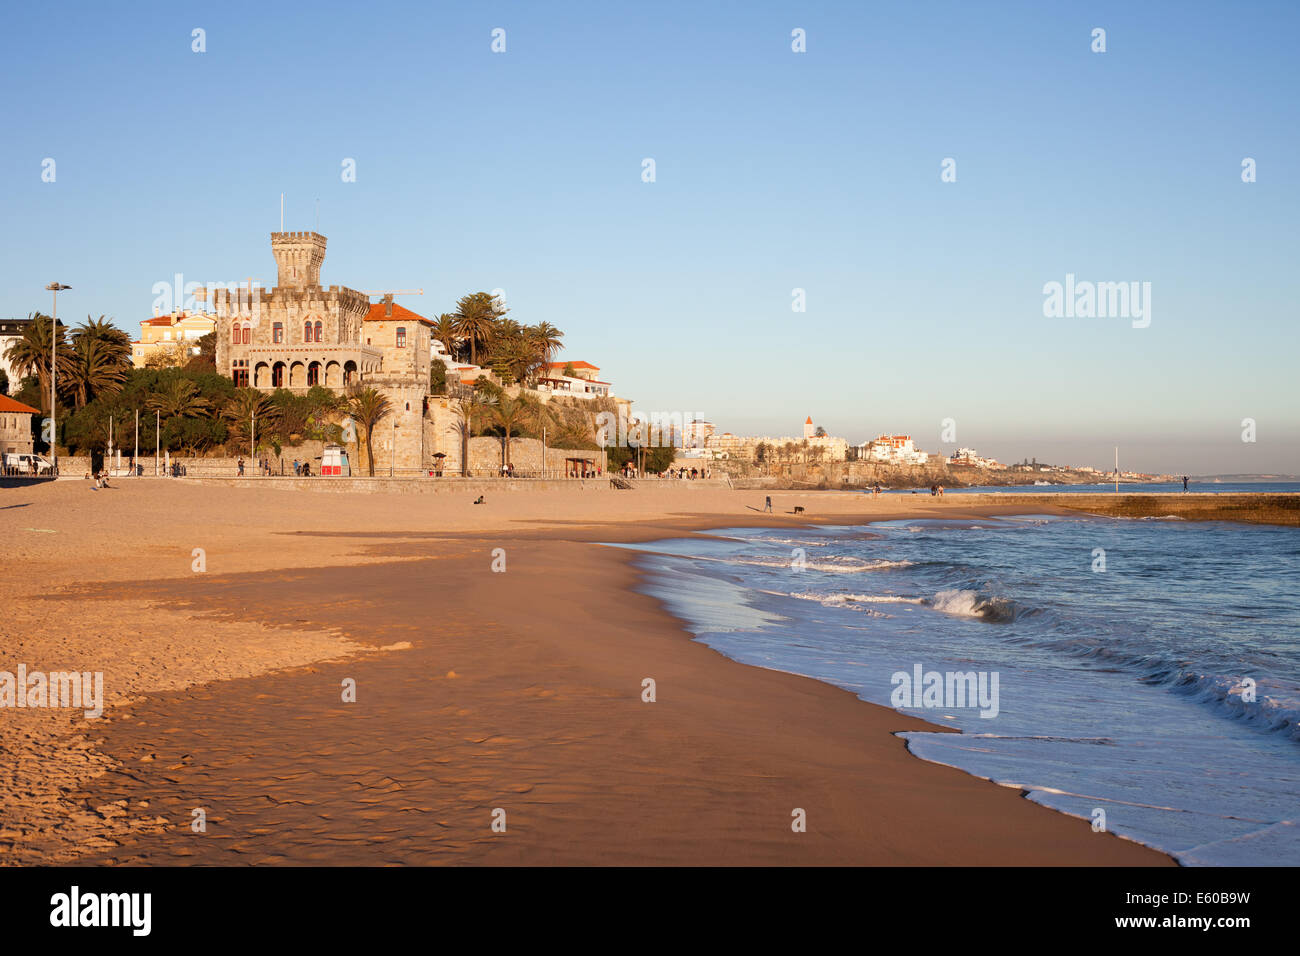 Tamariz Beach overlooked by a castle in resort town of Estoril, near Lisbon in Portugal. Stock Photo